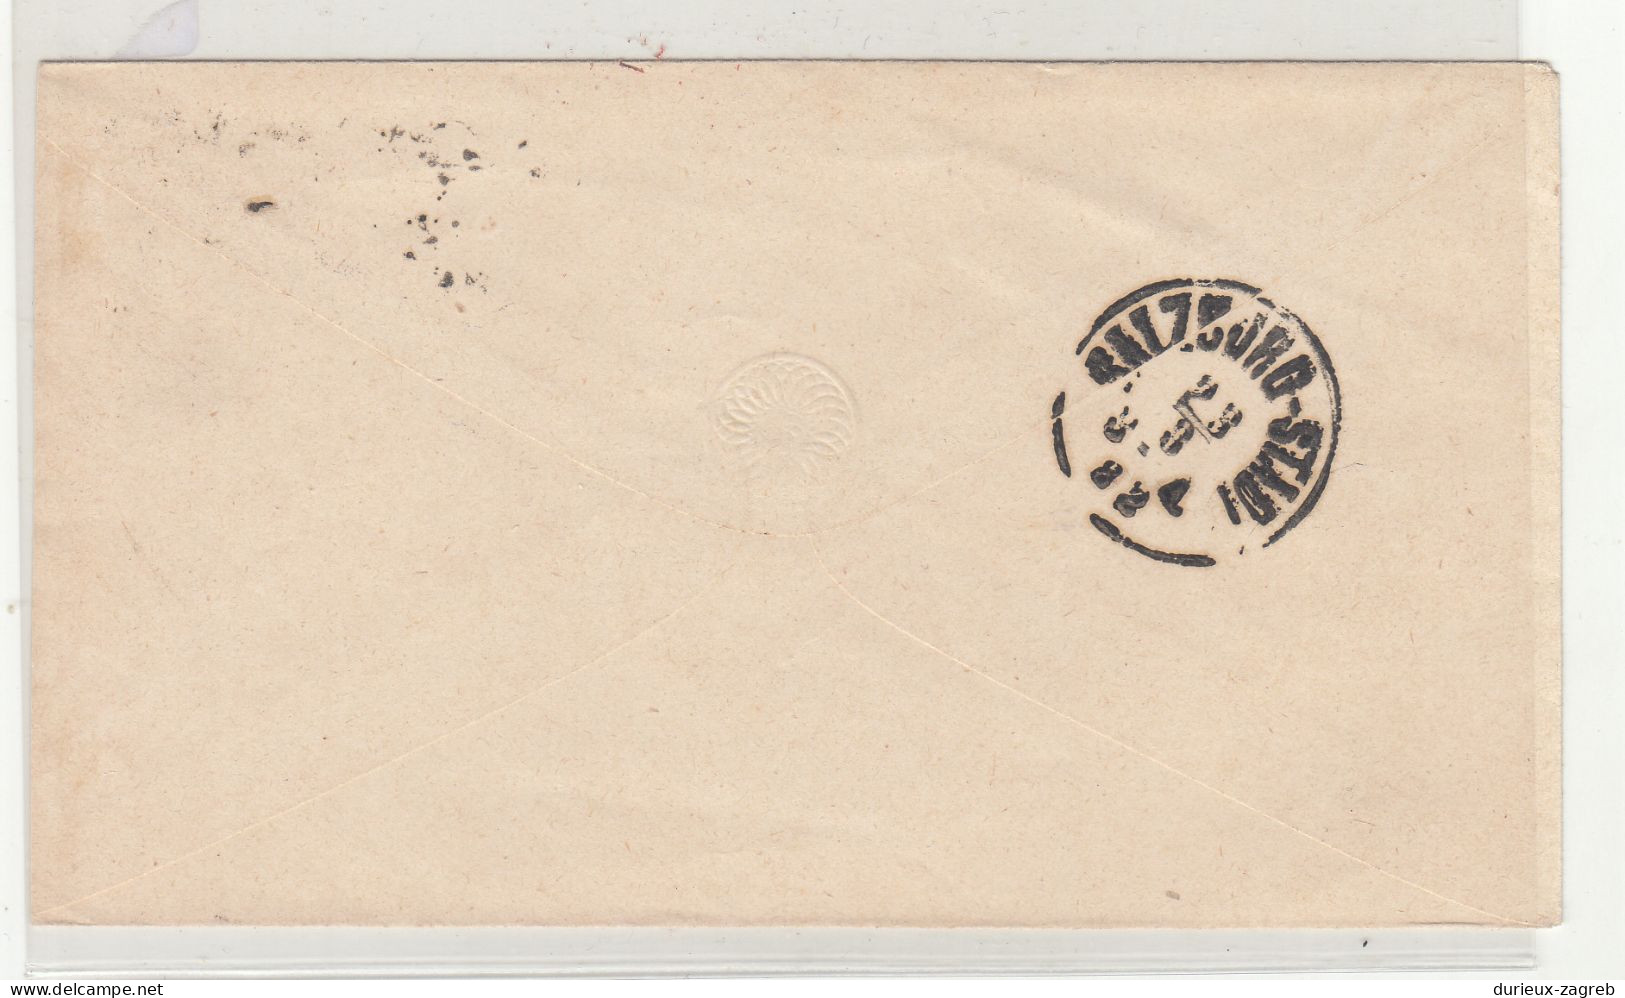 Austria Postal Stationery Letter Cover Posted 1882 B240401 - Covers